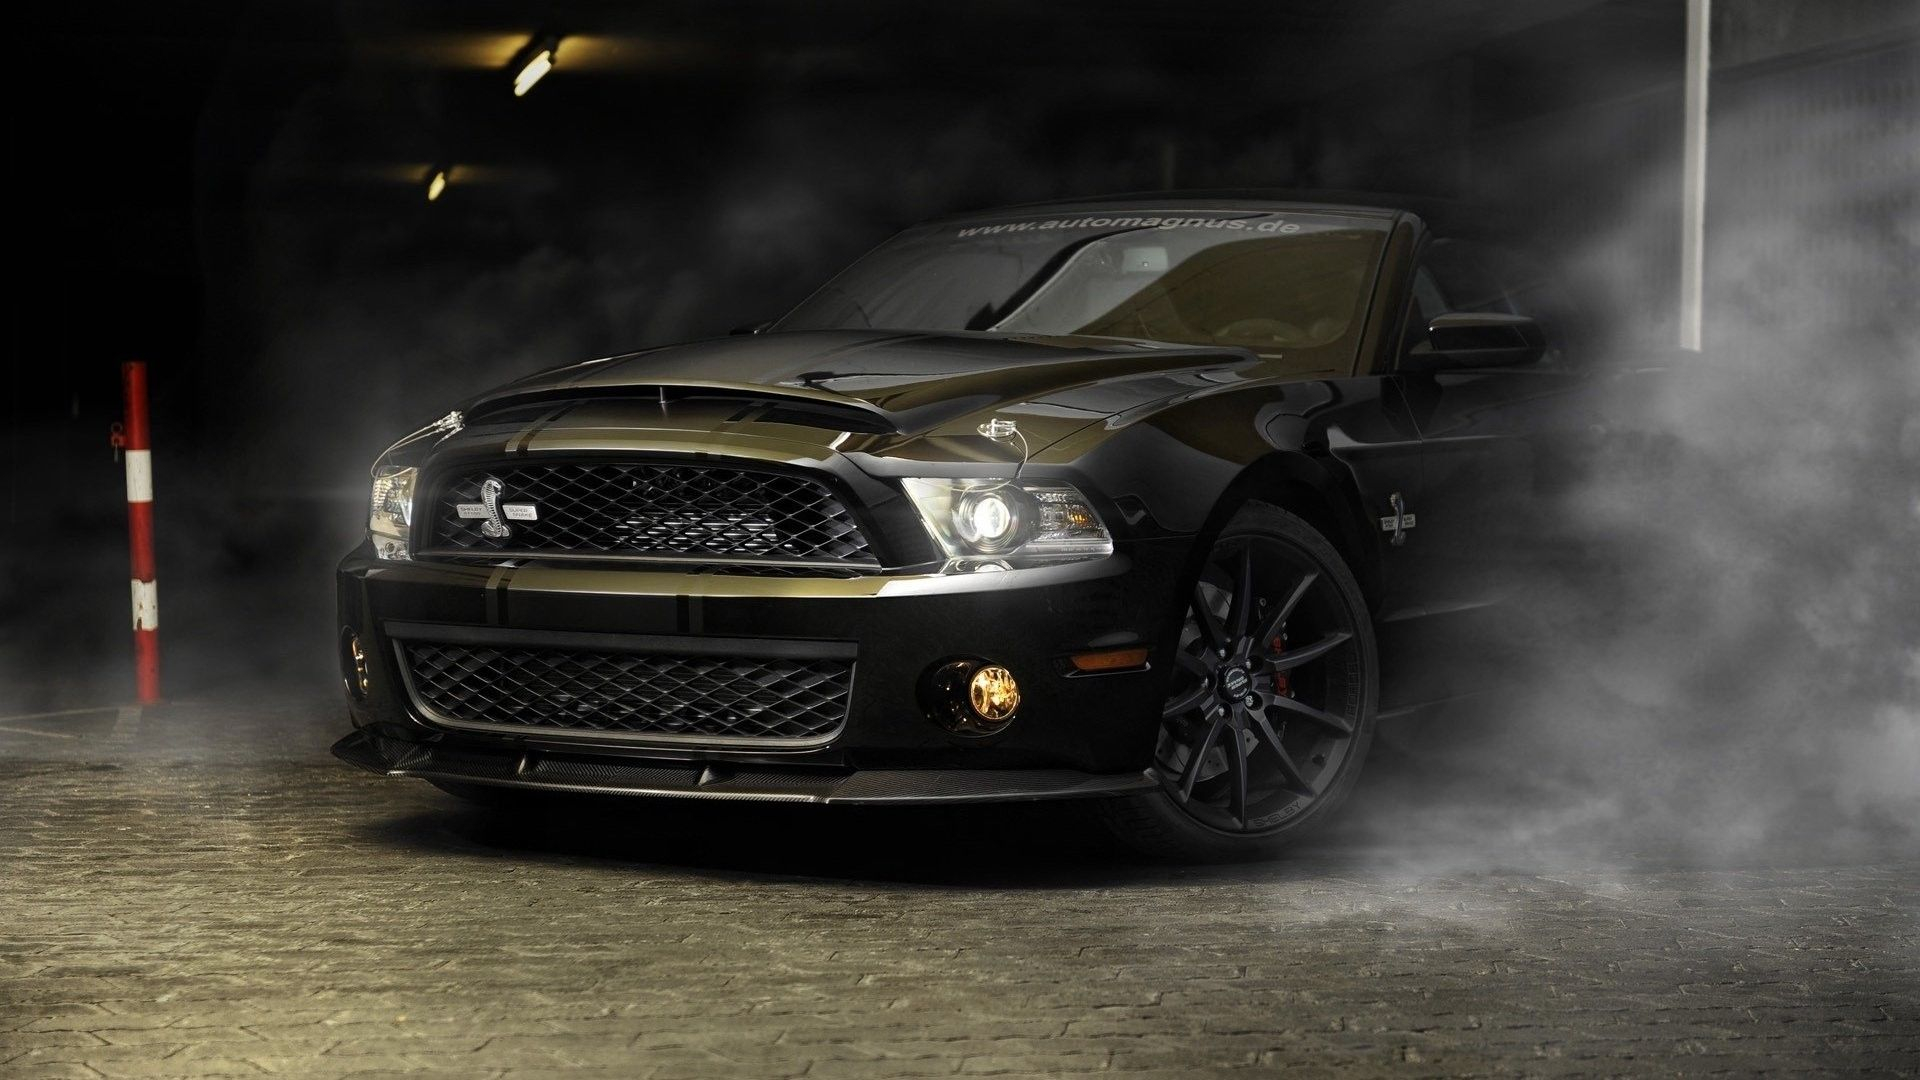 1920x1080 Shelby Mustang Wallpapers Top Free Shelby Mustang Backgrounds